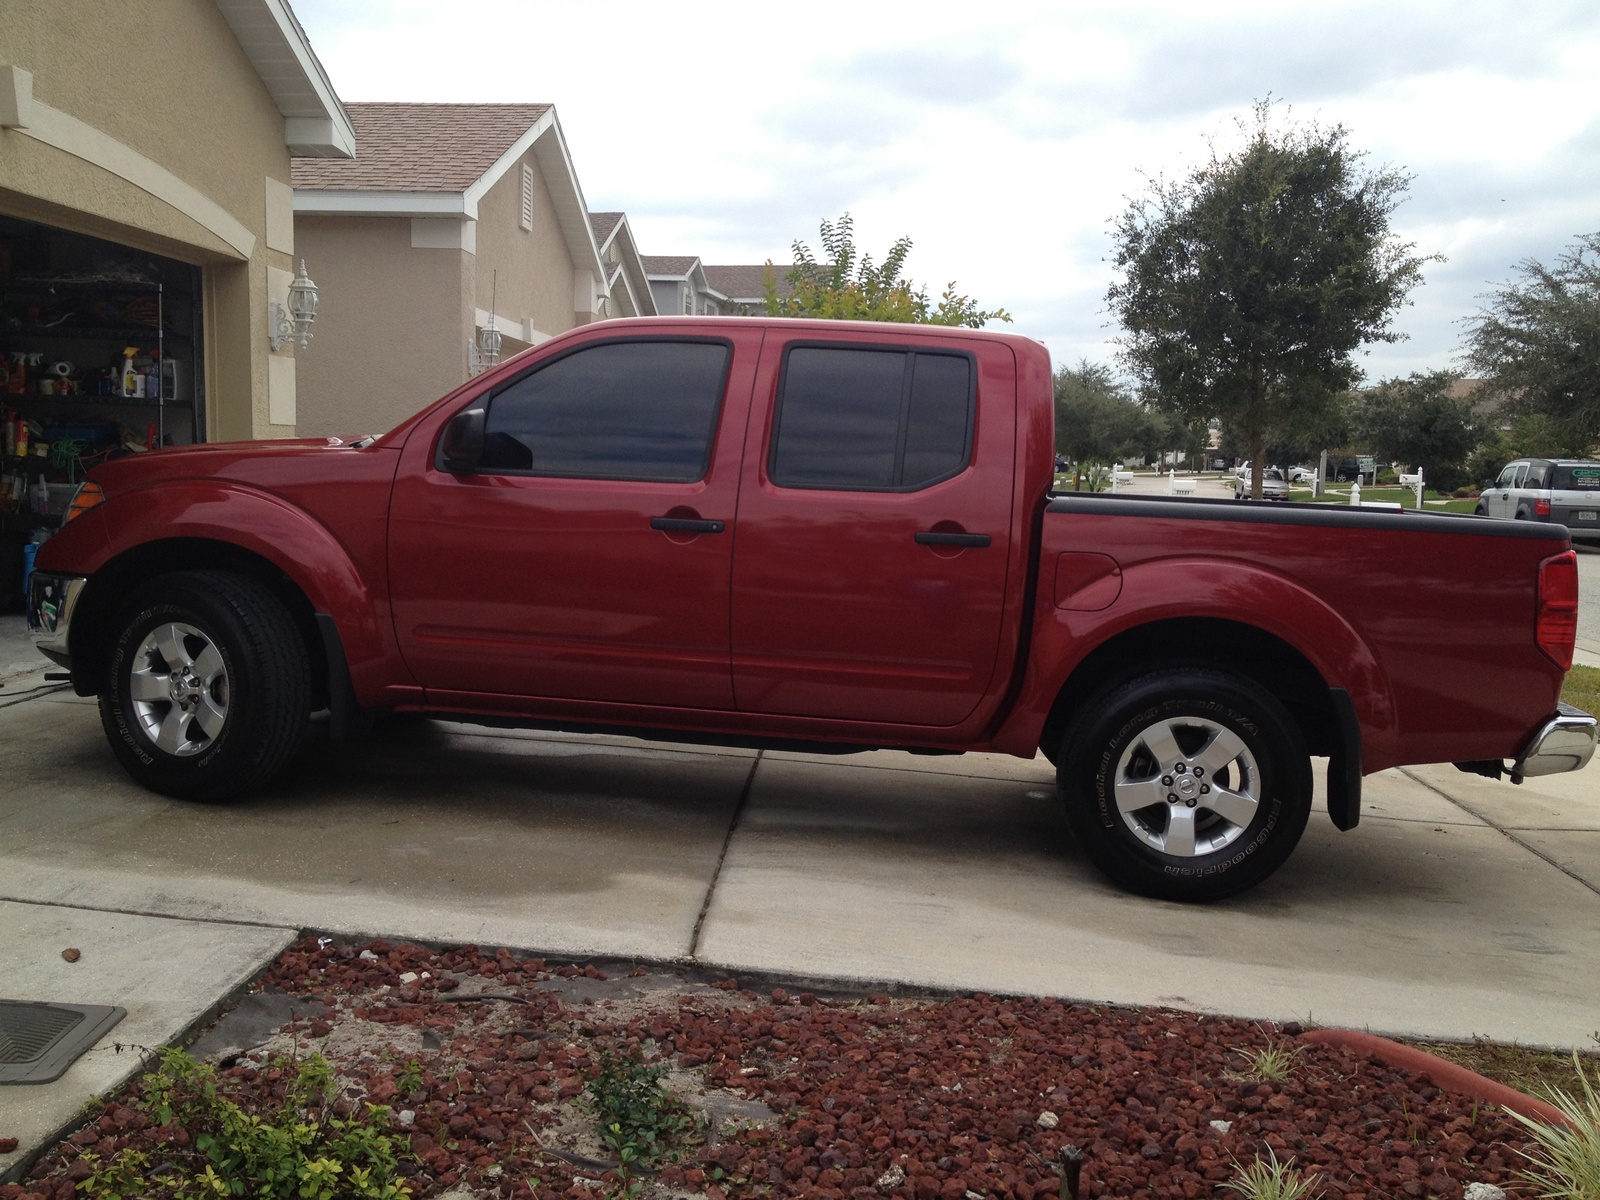 Used 2010 nissan frontier crew cab #8